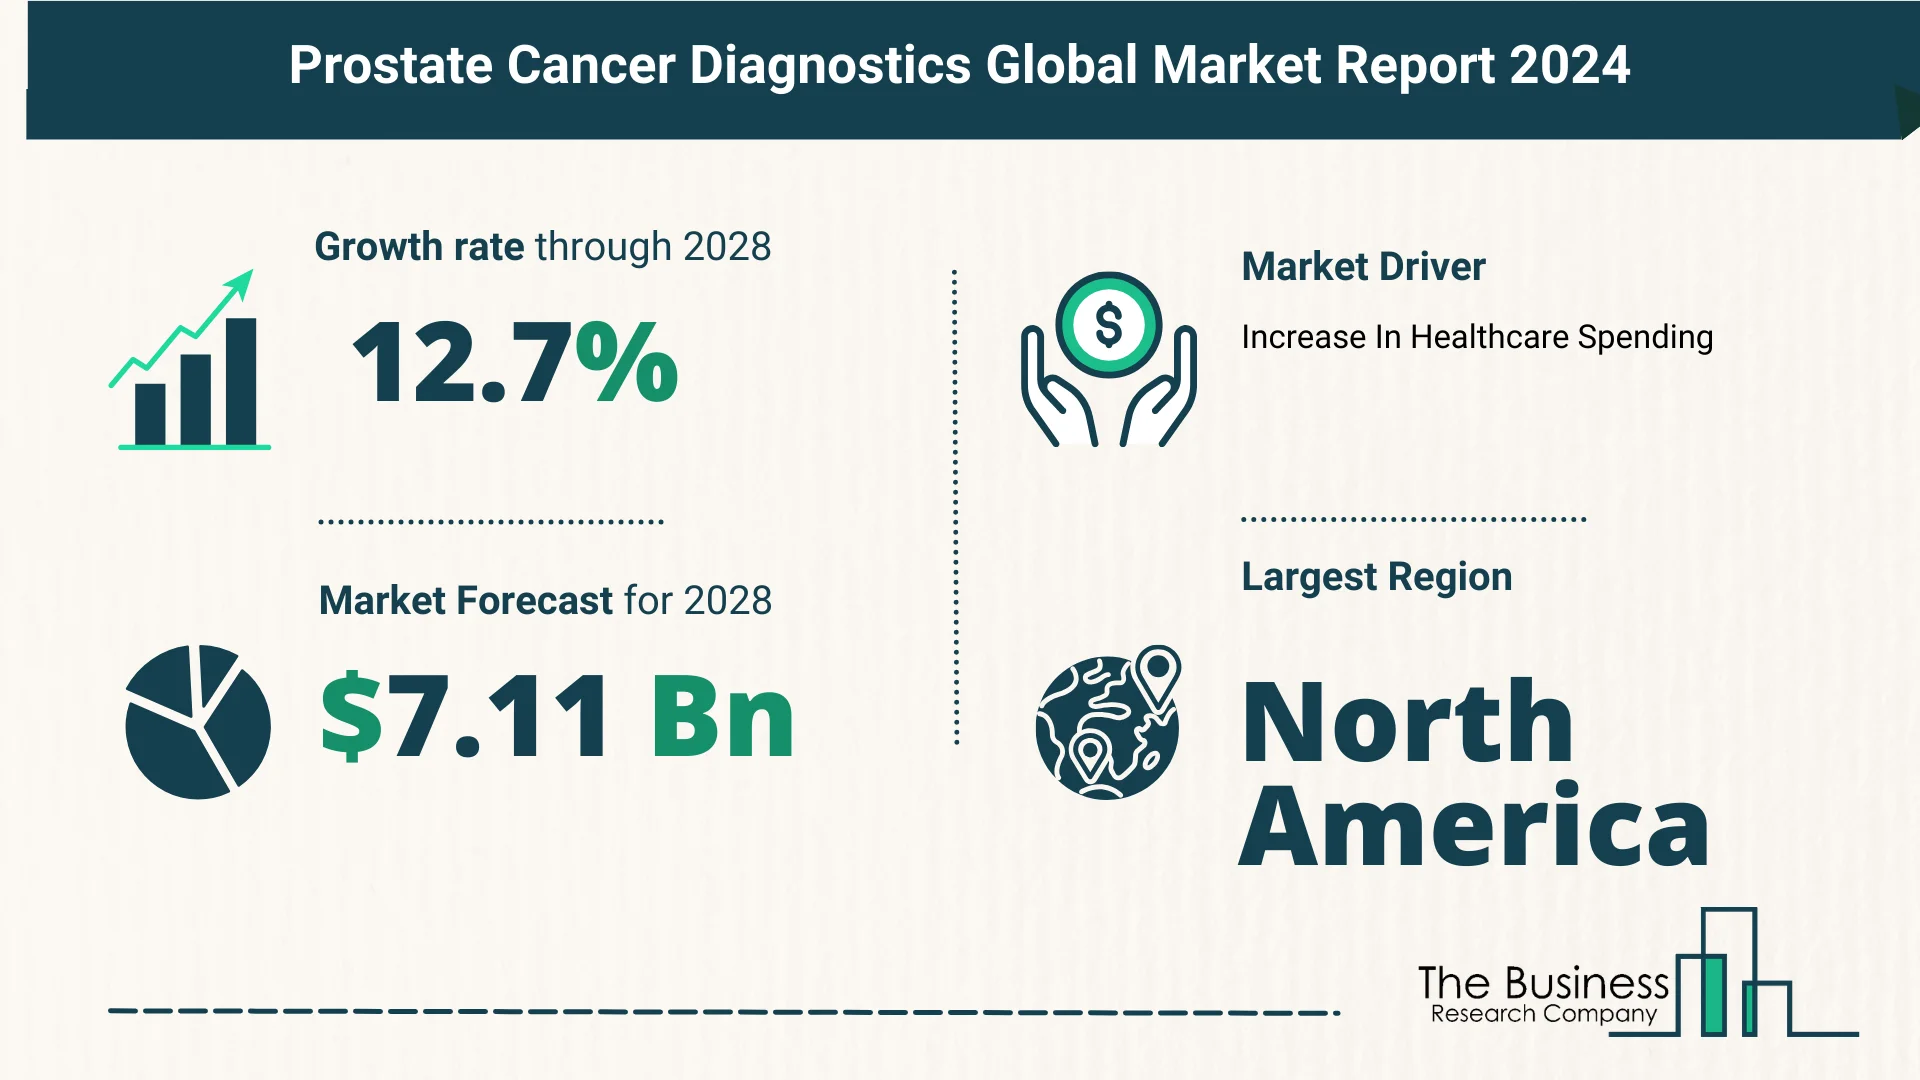 Global Prostate Cancer Diagnostics Market Analysis: Estimated Market Size And Growth Rate